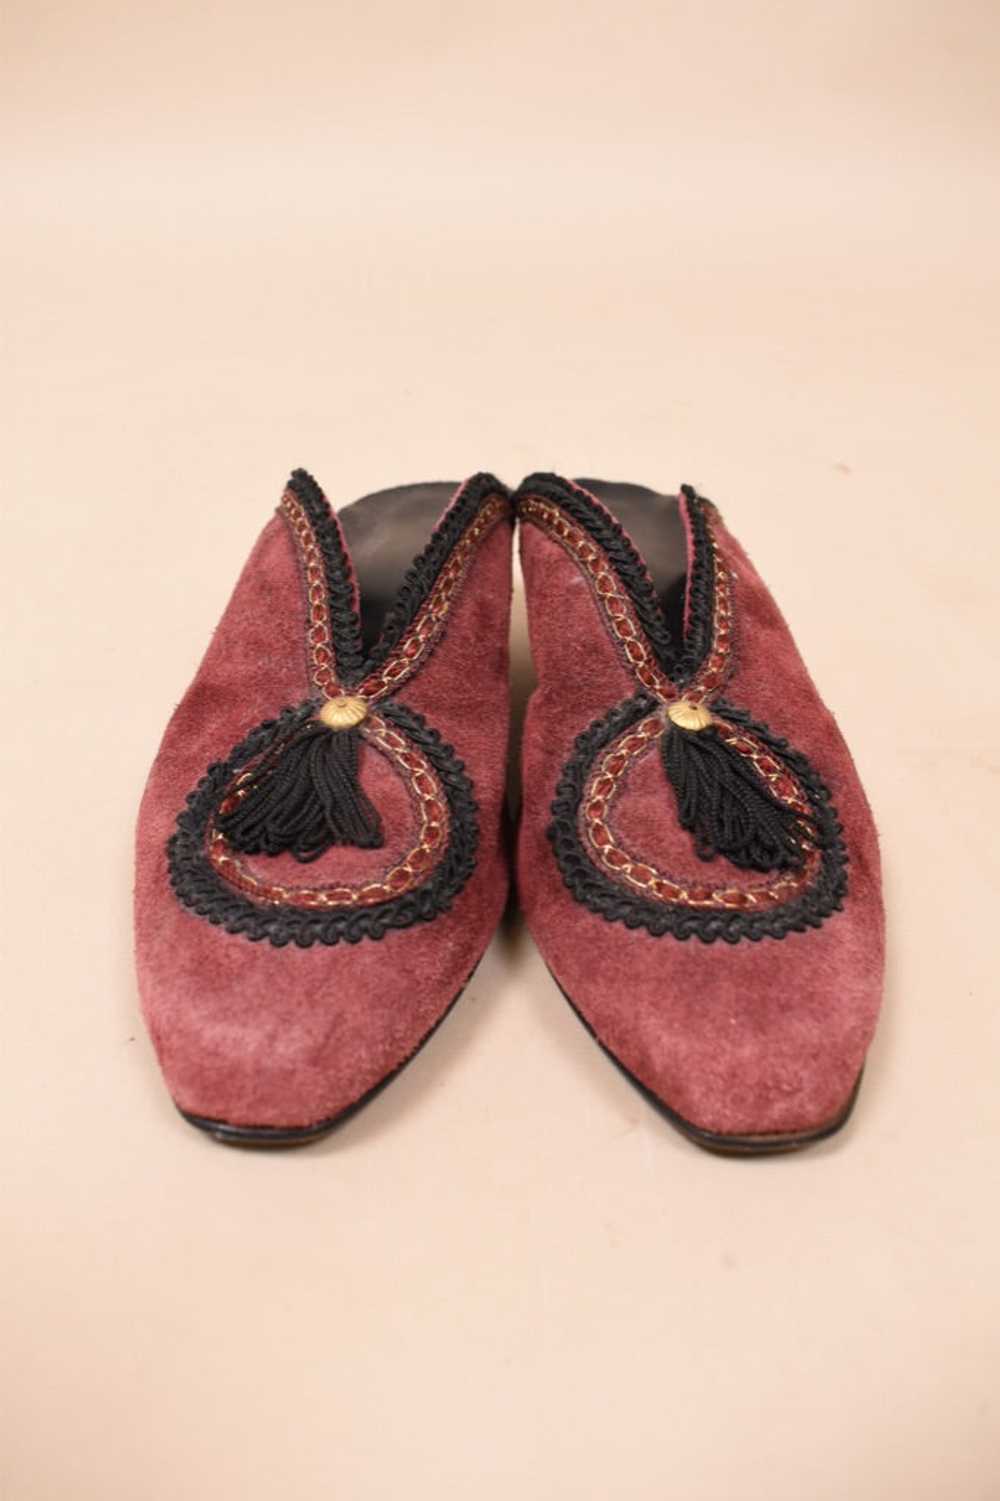 Red Suede Mules With Tassels, 8 - image 3